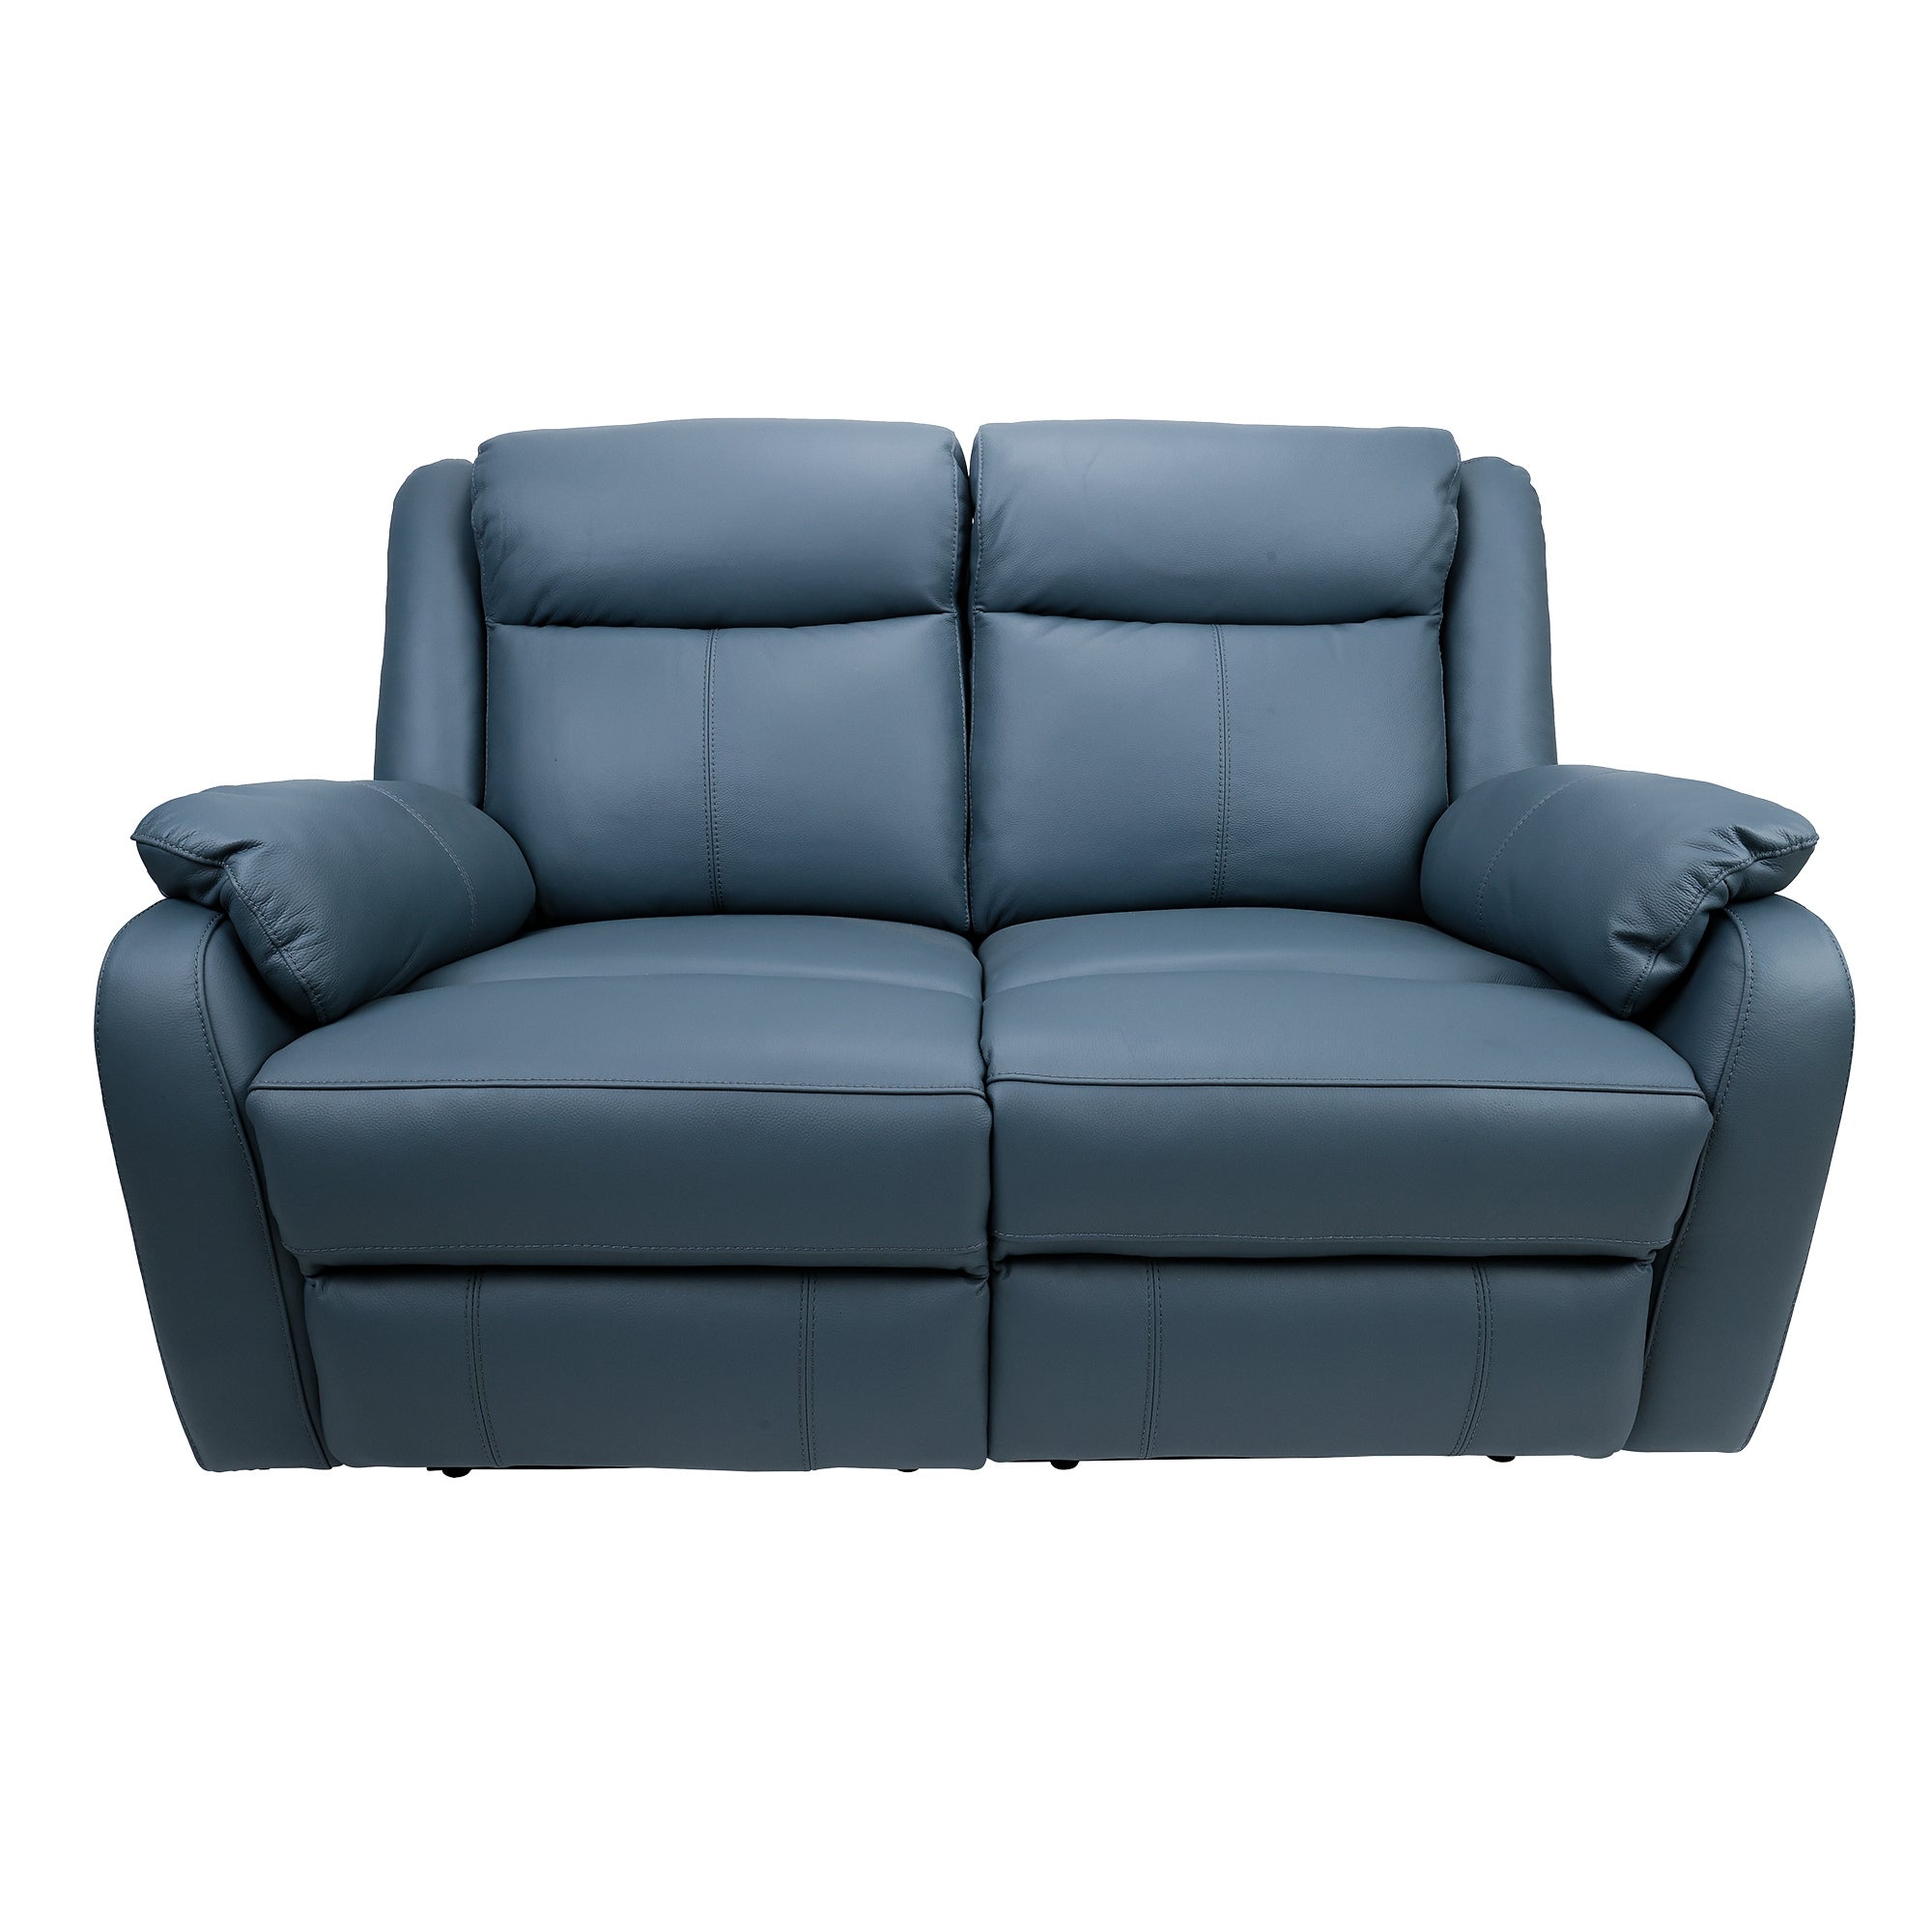 Bella 2 Seater Electric Recliner Genuine Leather Upholstered Lounge - Blue